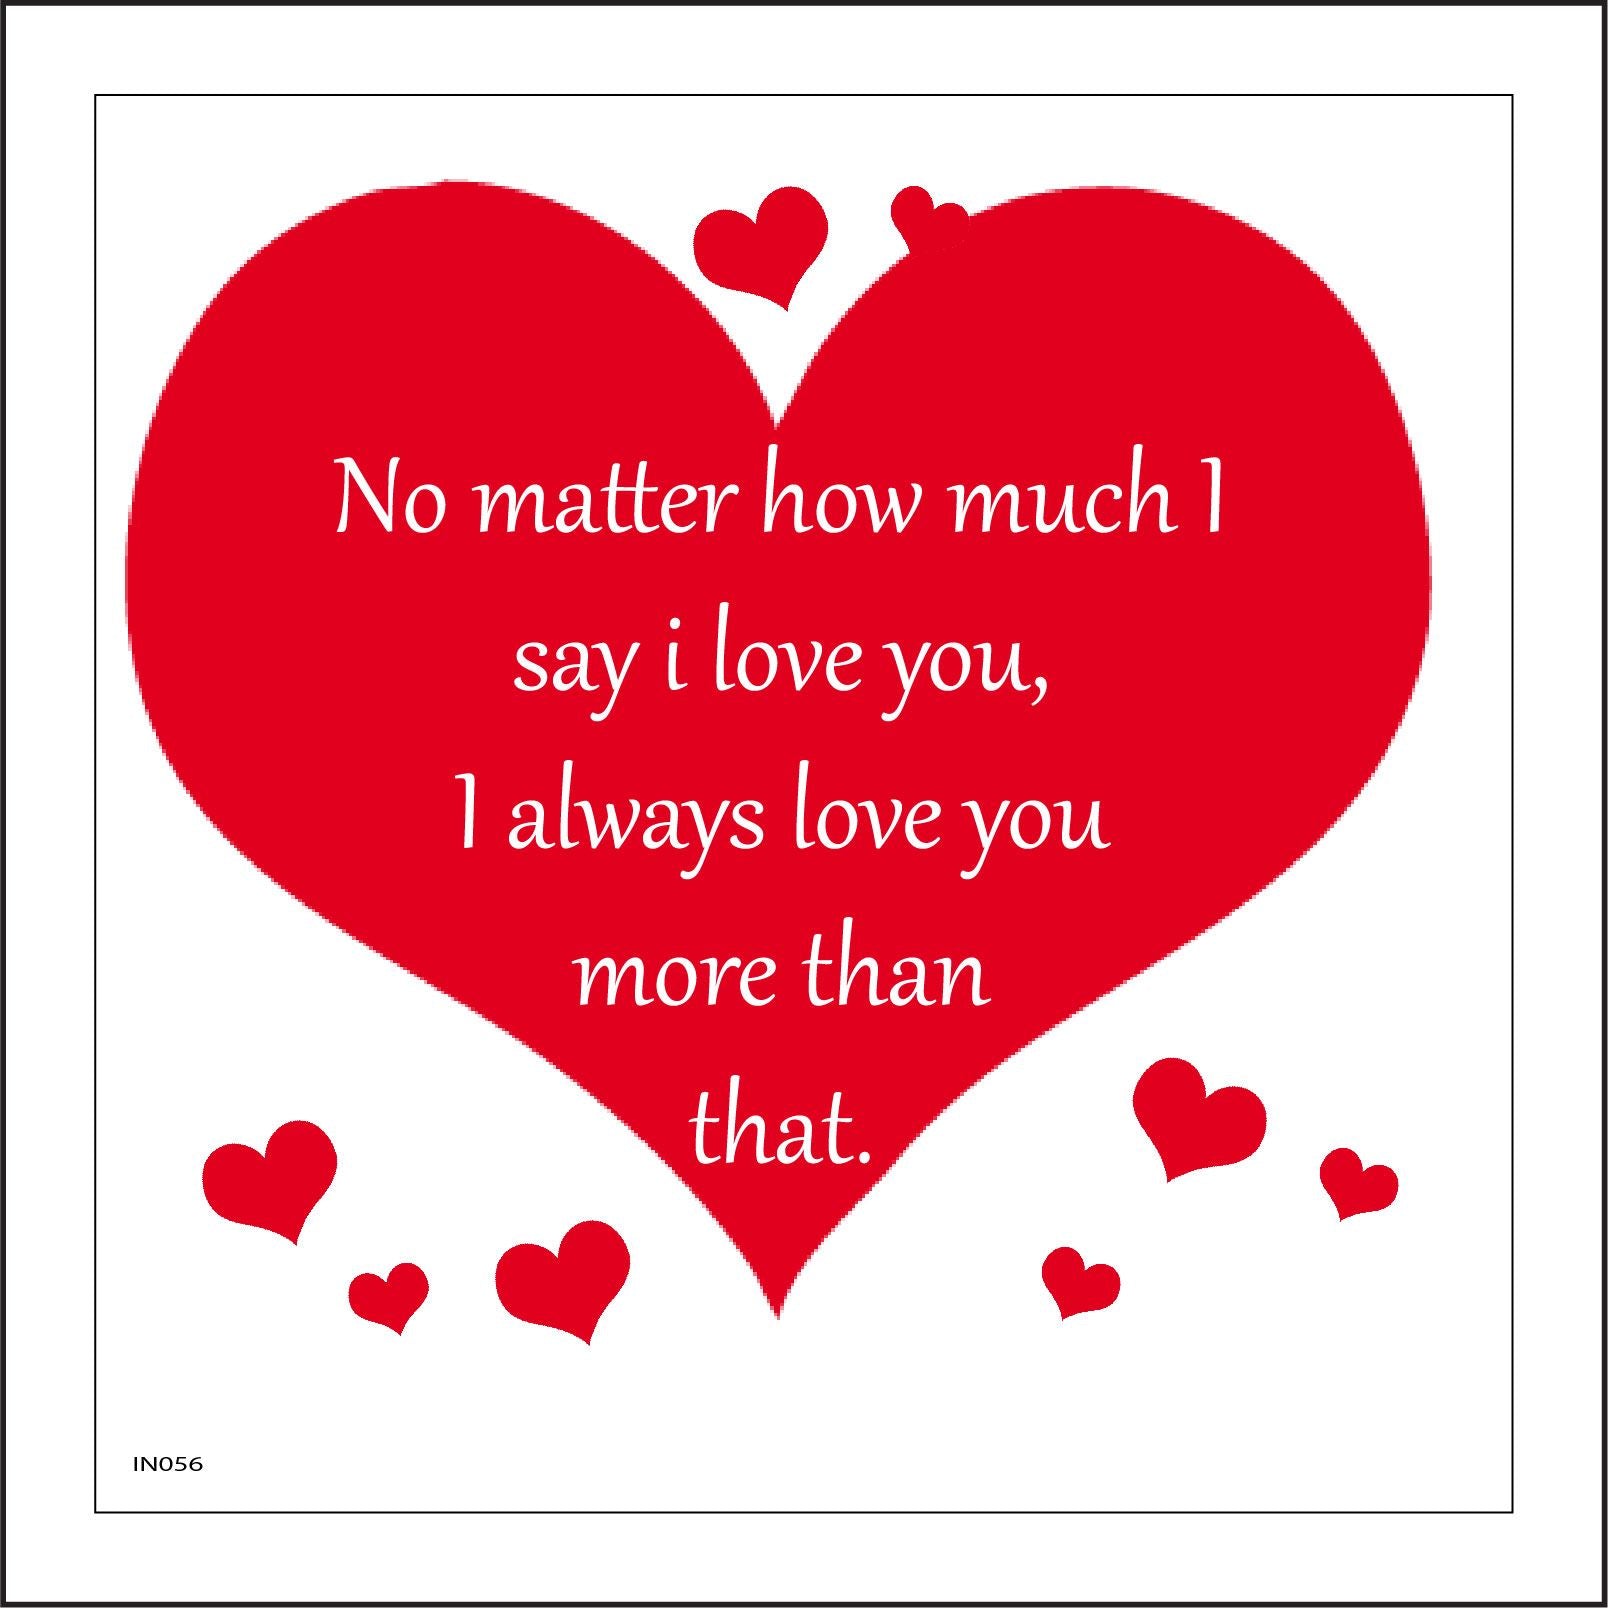 Say　How　–　Always　PWDirect　with　Much　Sign　No　I　Love　Love　Hearts　Than　More　You,　I　You　That.　Matter　I